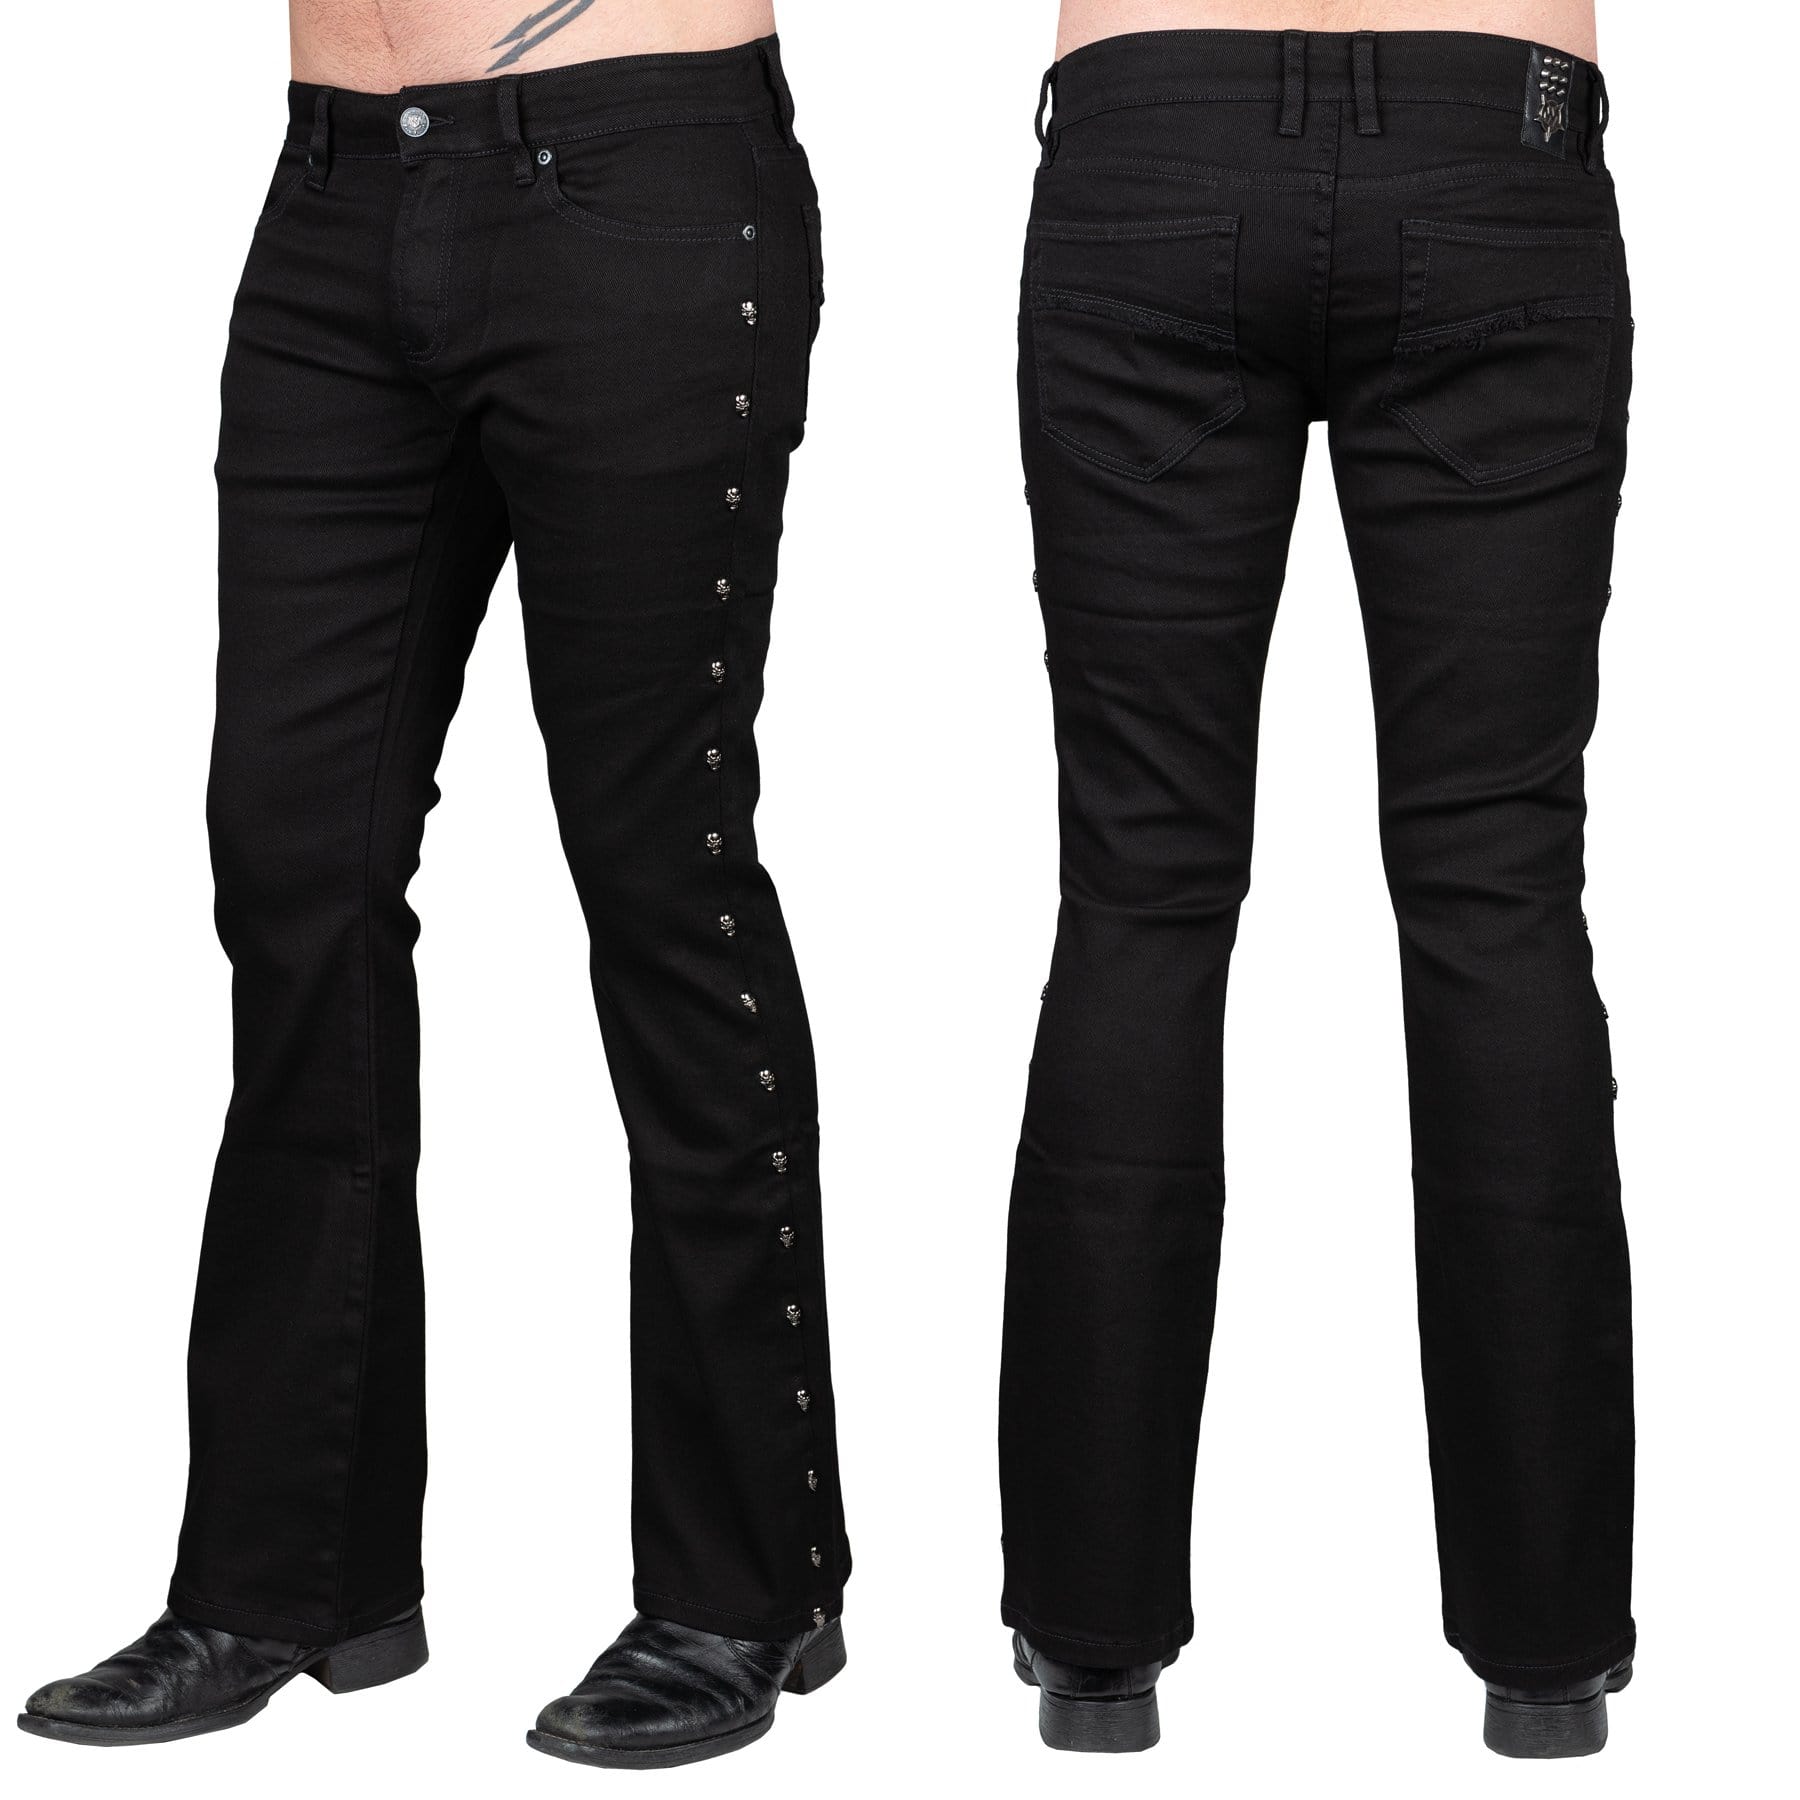 All Access Collection Pants Gauntlet Skull Jeans